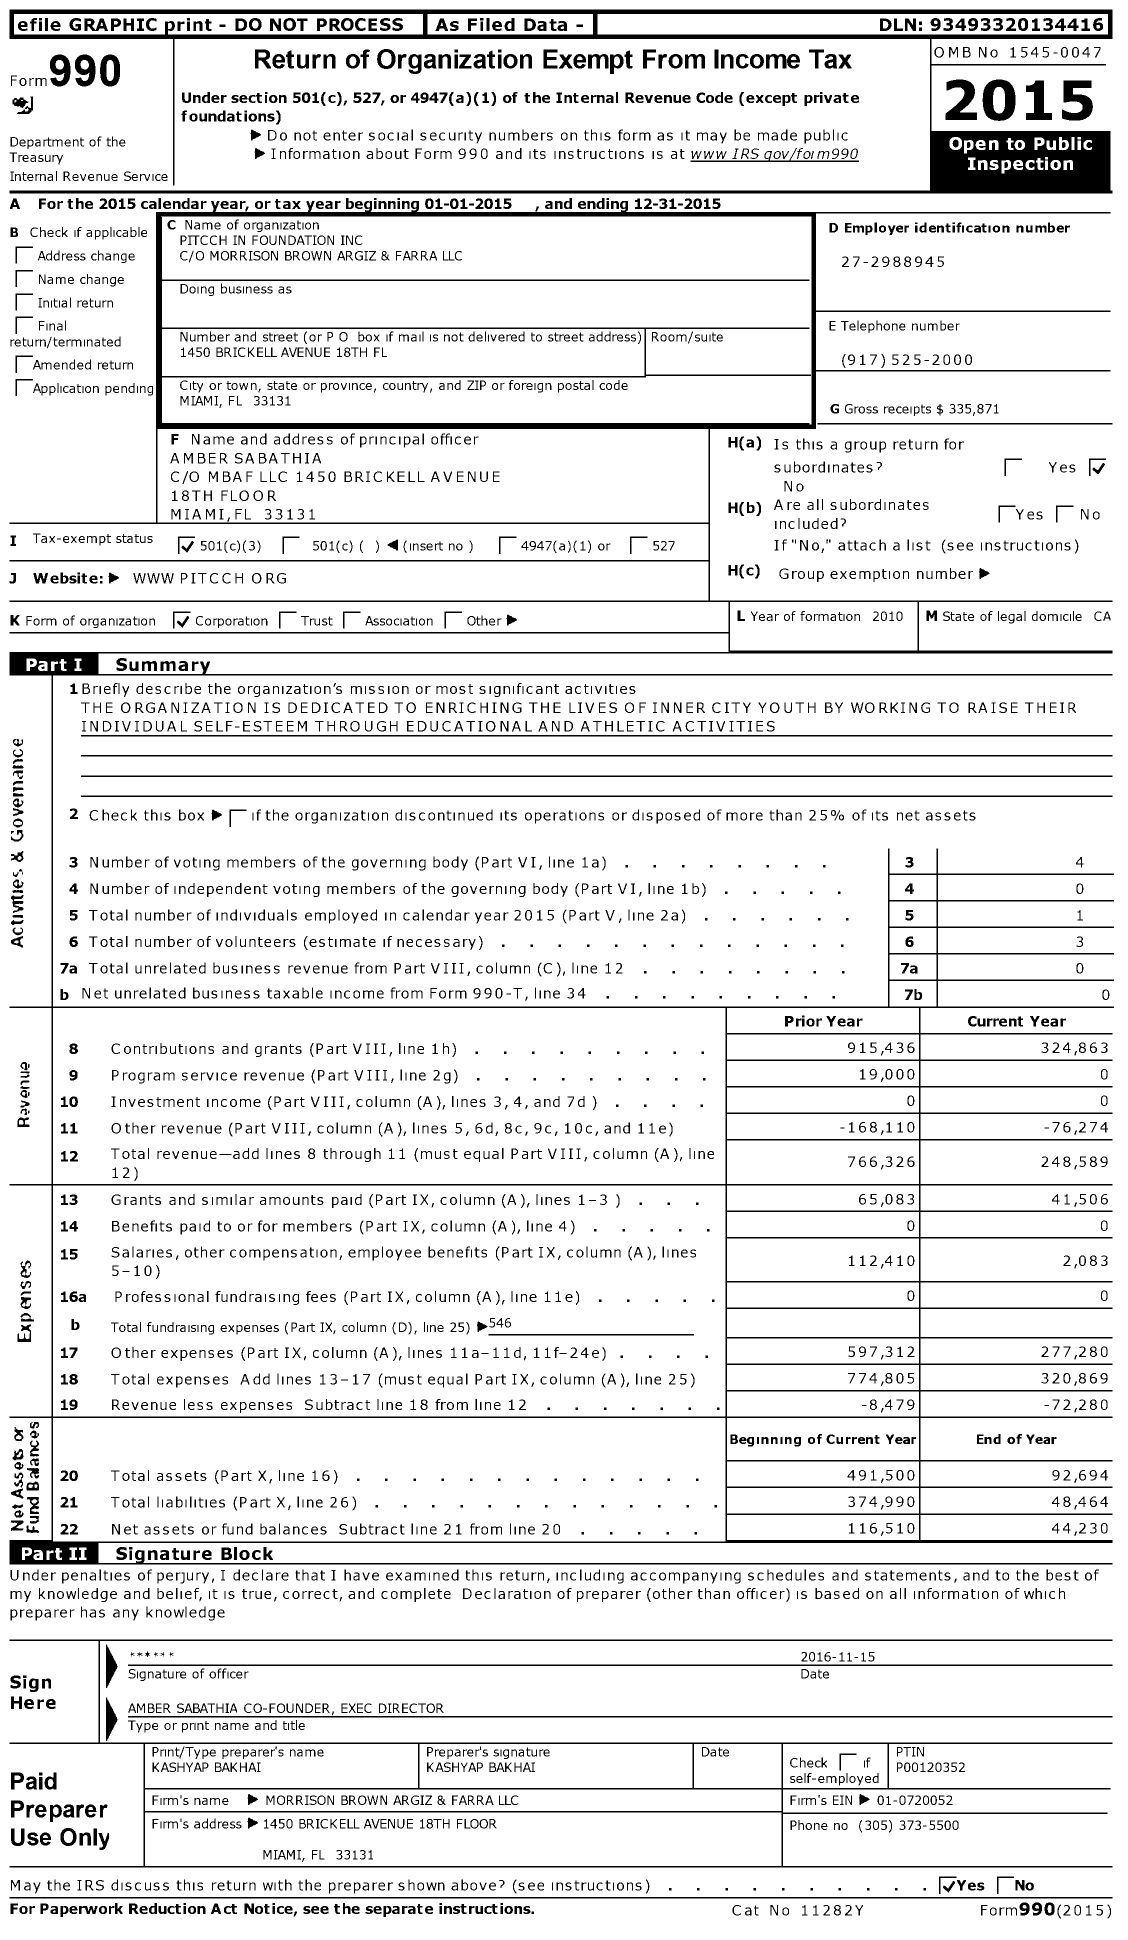 Image of first page of 2015 Form 990 for Pitcch in Foundation